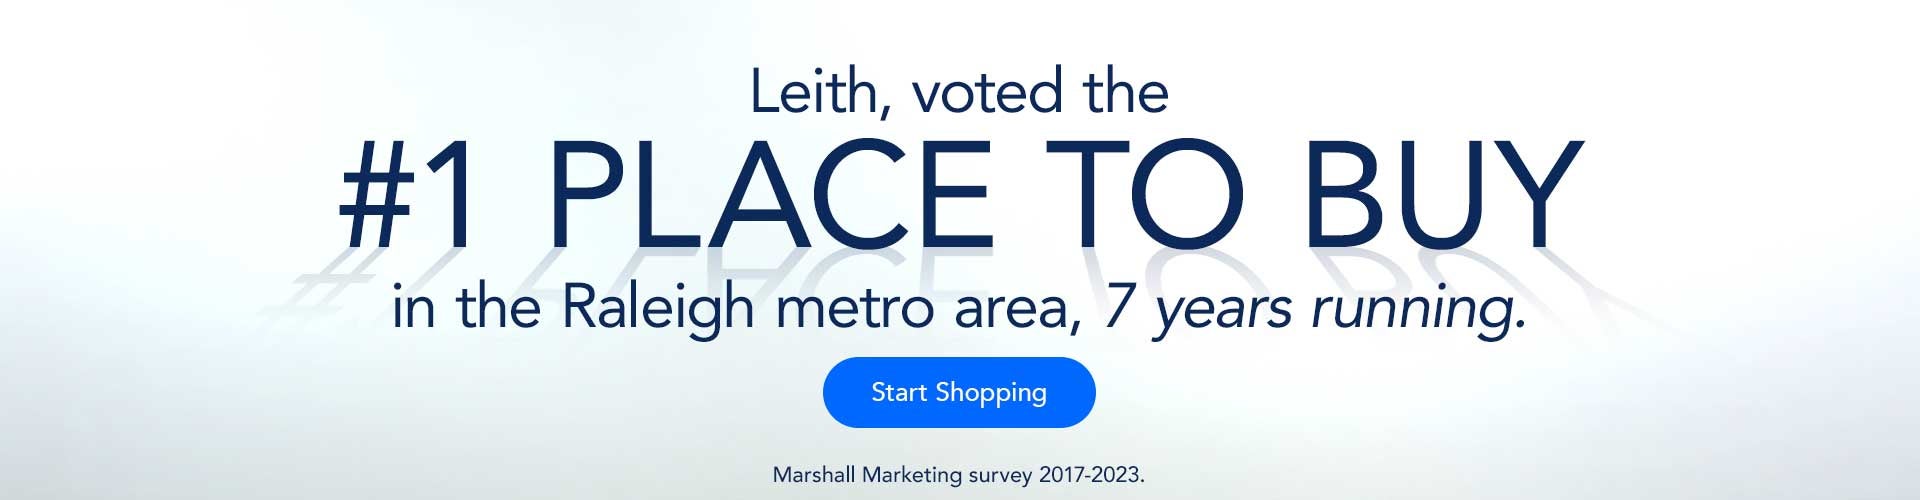 Leith Voted number one in Raleigh metro area